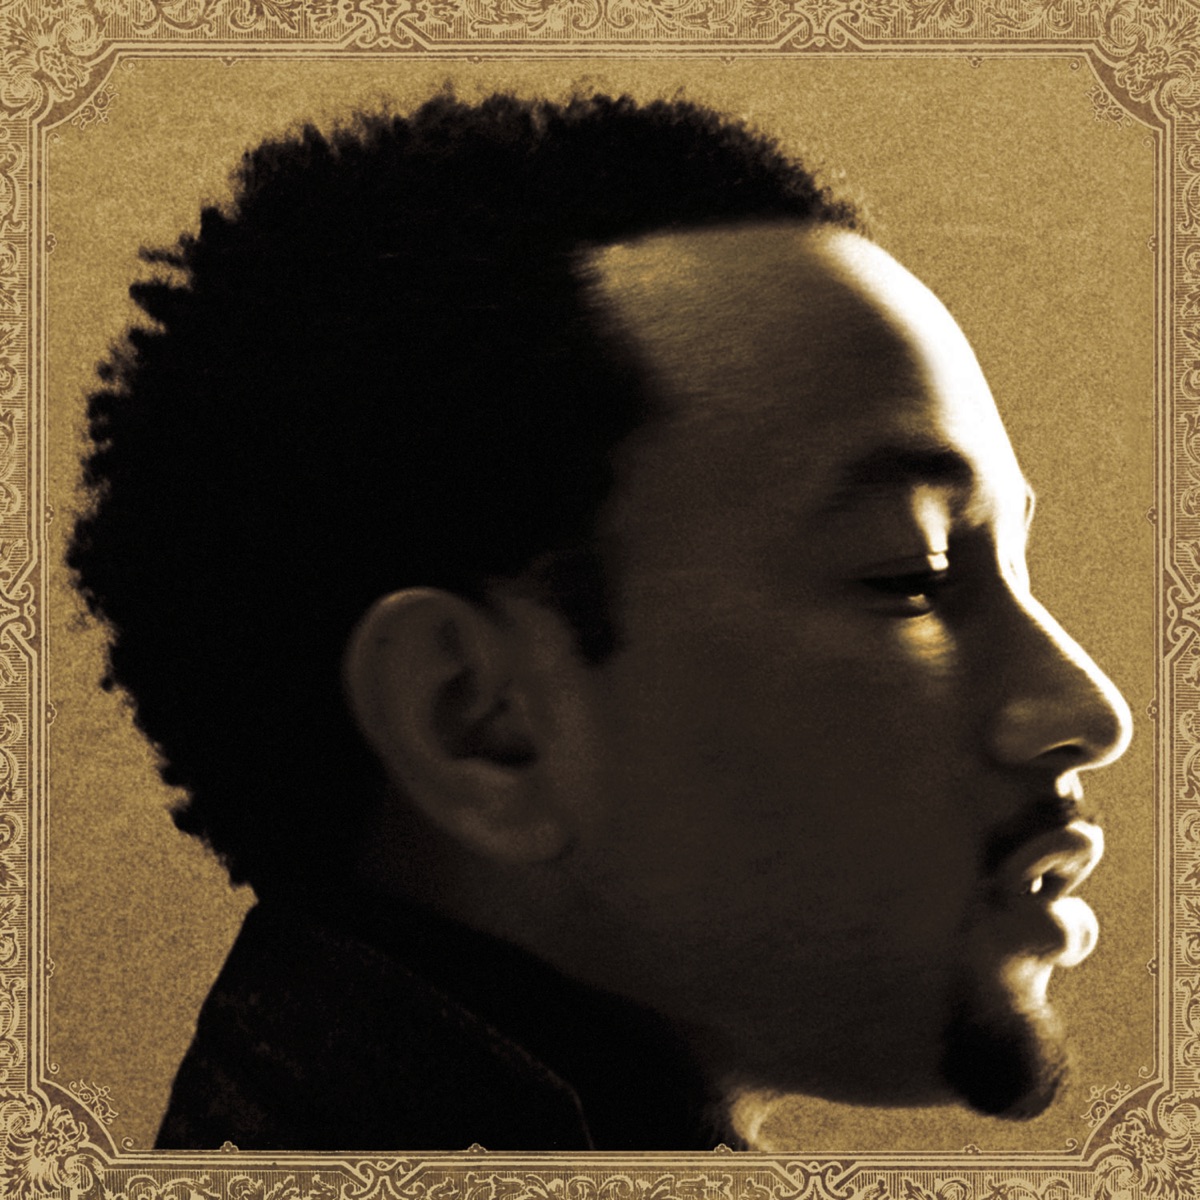 Wake Up! by John Legend & The Roots on Apple Music